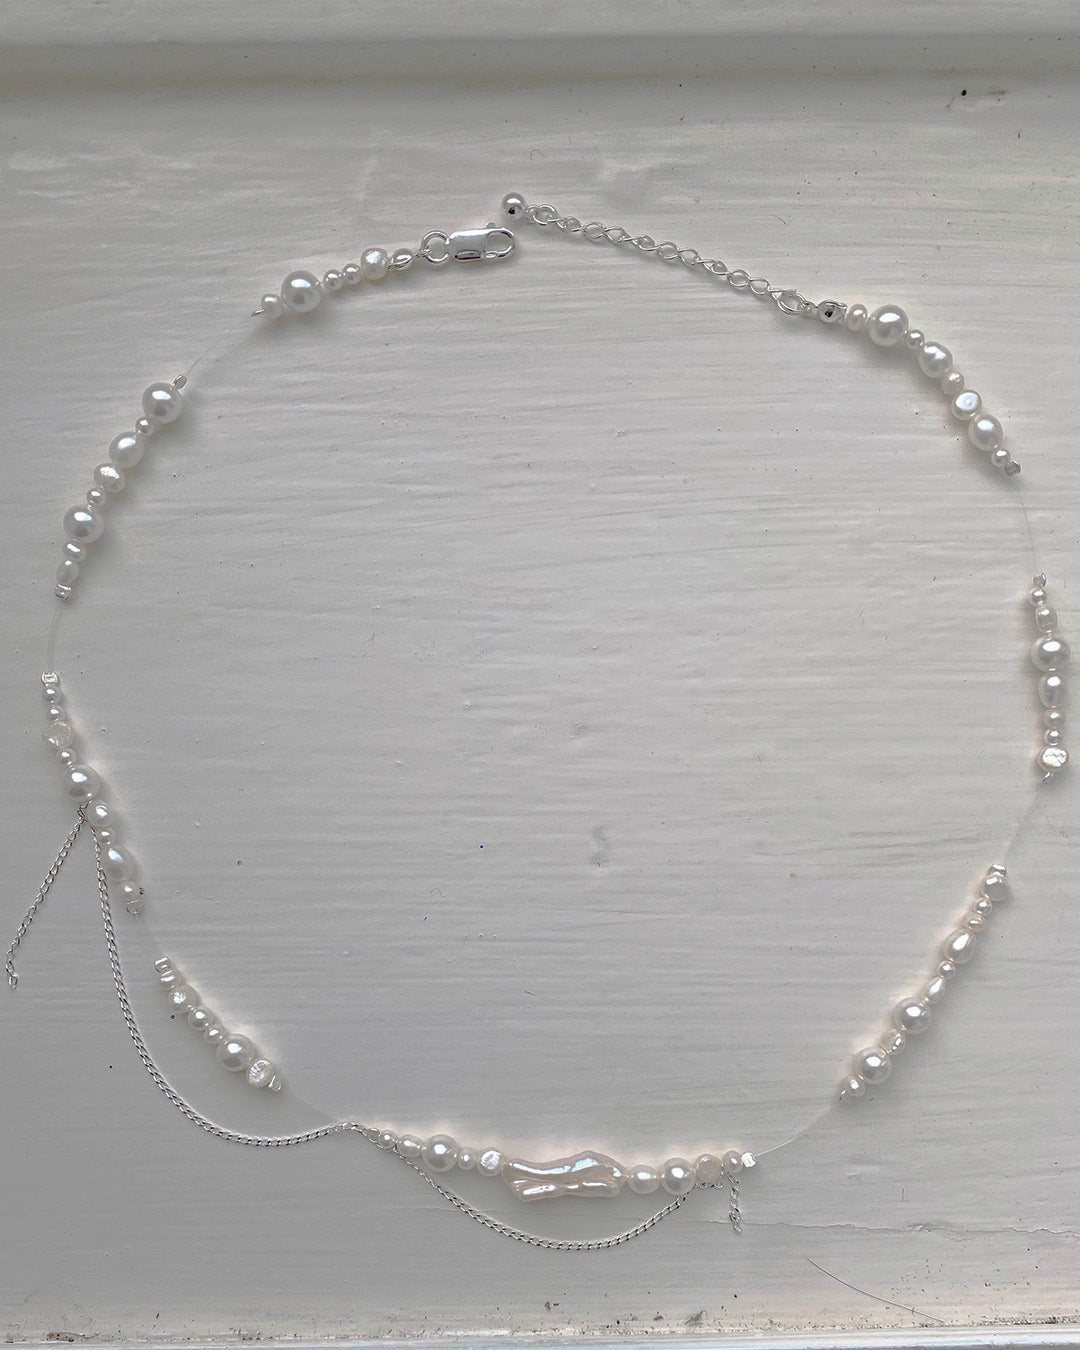 Flashing Lights Necklace - white/silver